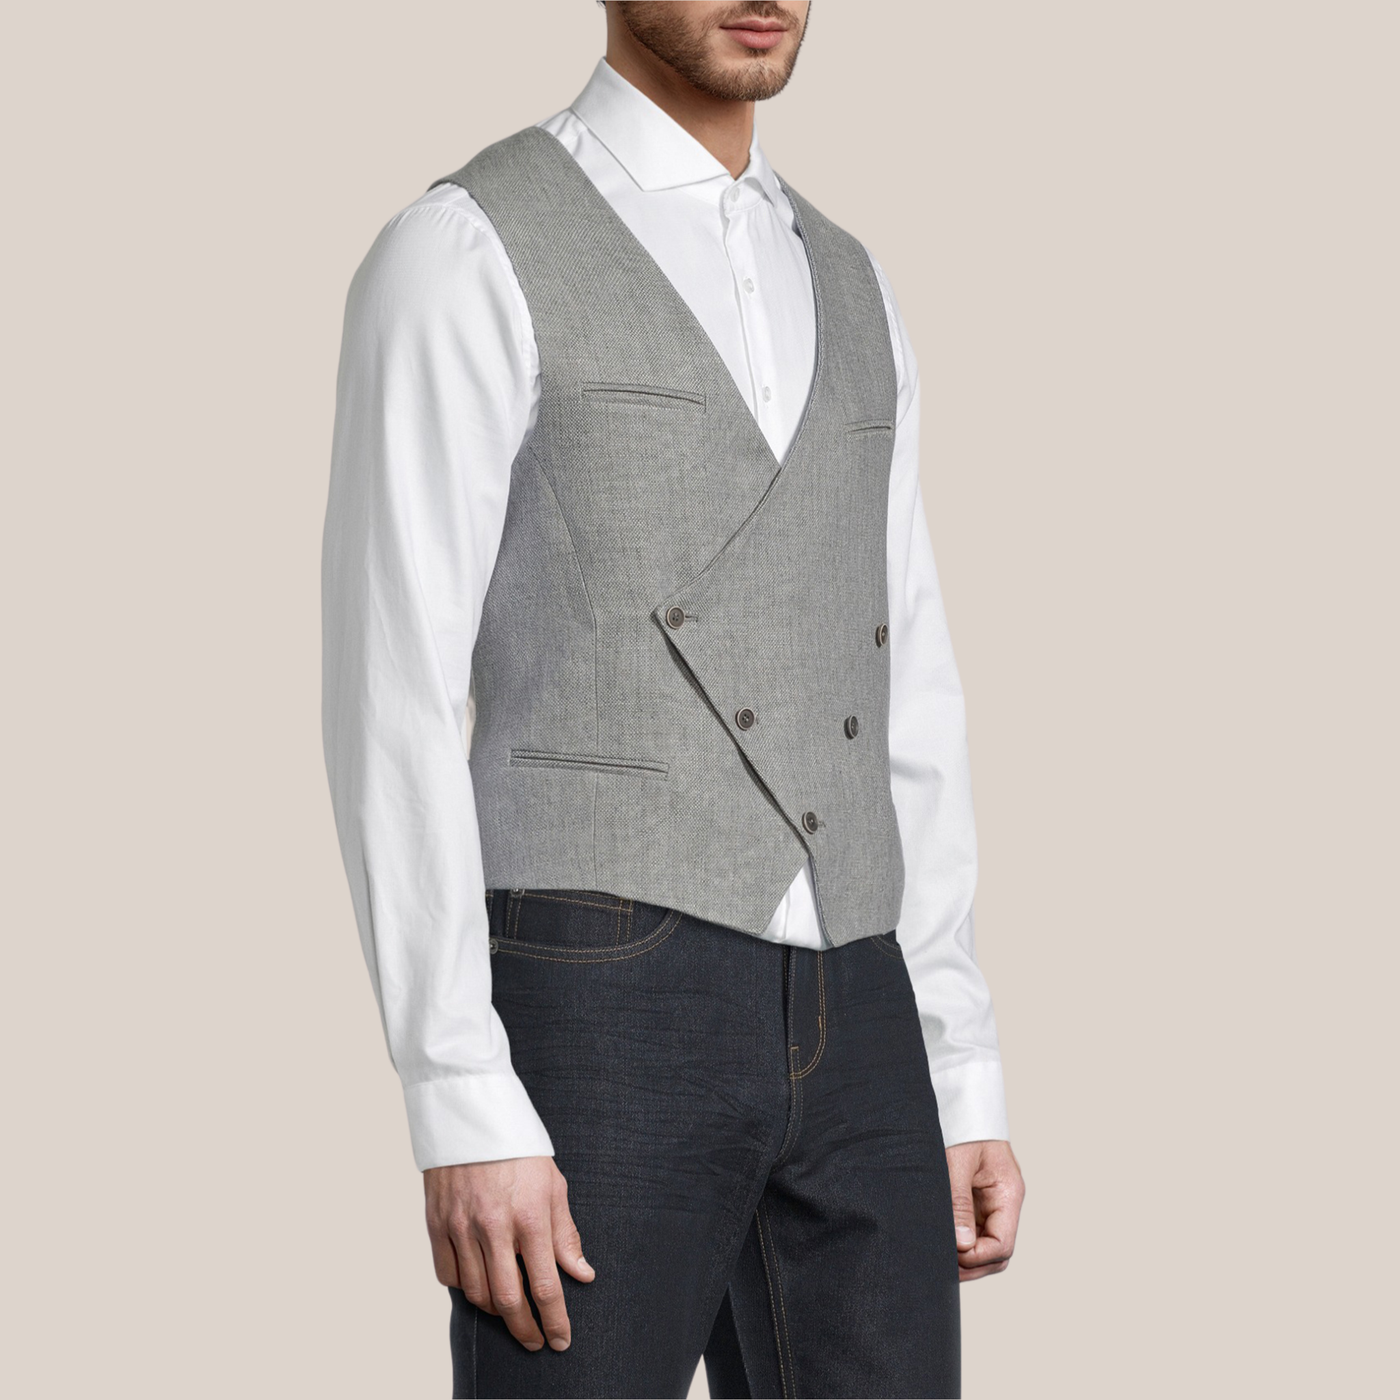 Gotstyle Fashion - Christopher Bates Vests Double Breasted Linen Waistcoat - Grey